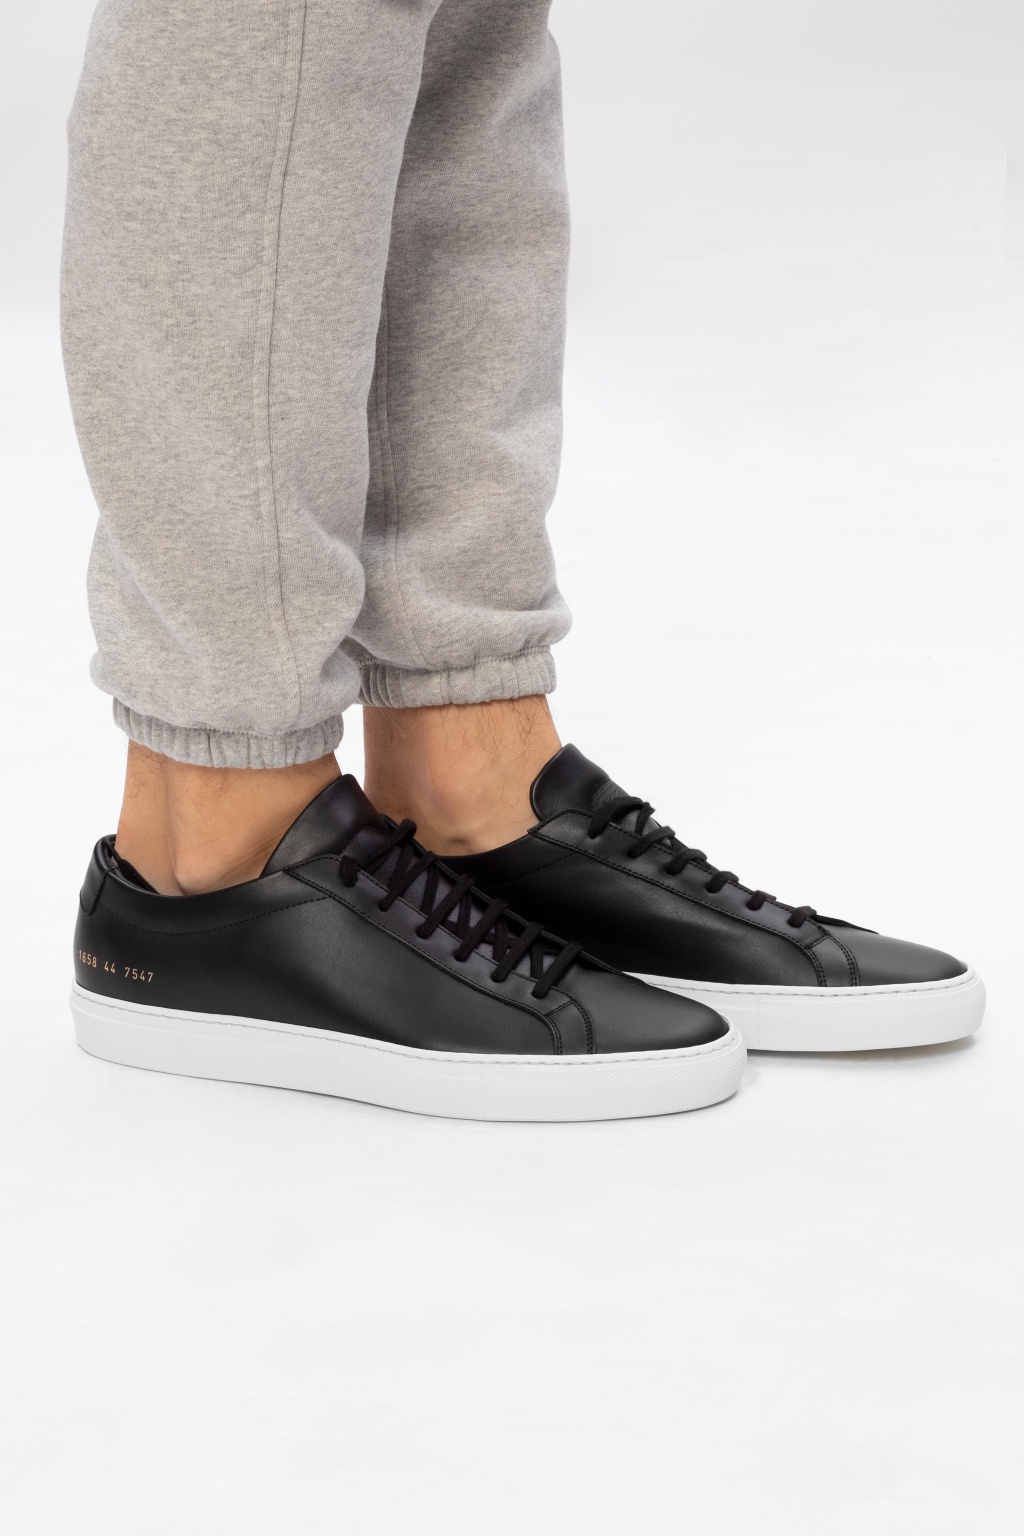 COMMON PROJECTS achilles low black 1658 卸し売り購入 4800円引き ...